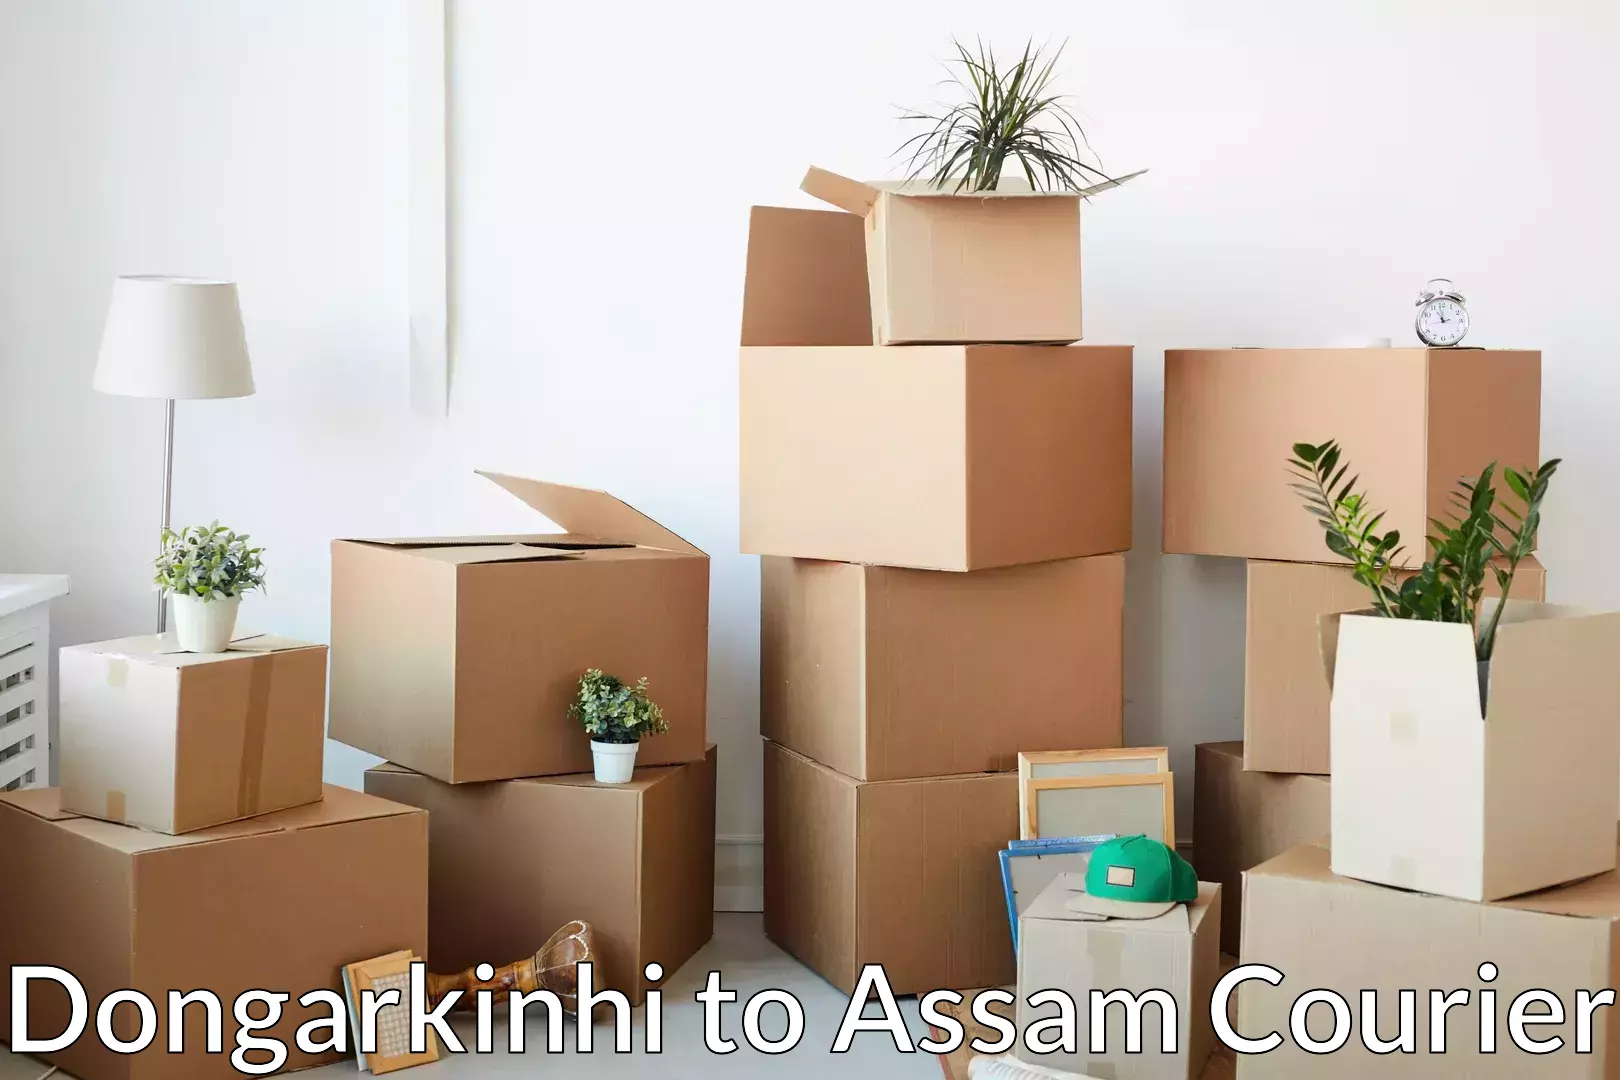 Budget-friendly moving services in Dongarkinhi to Teok